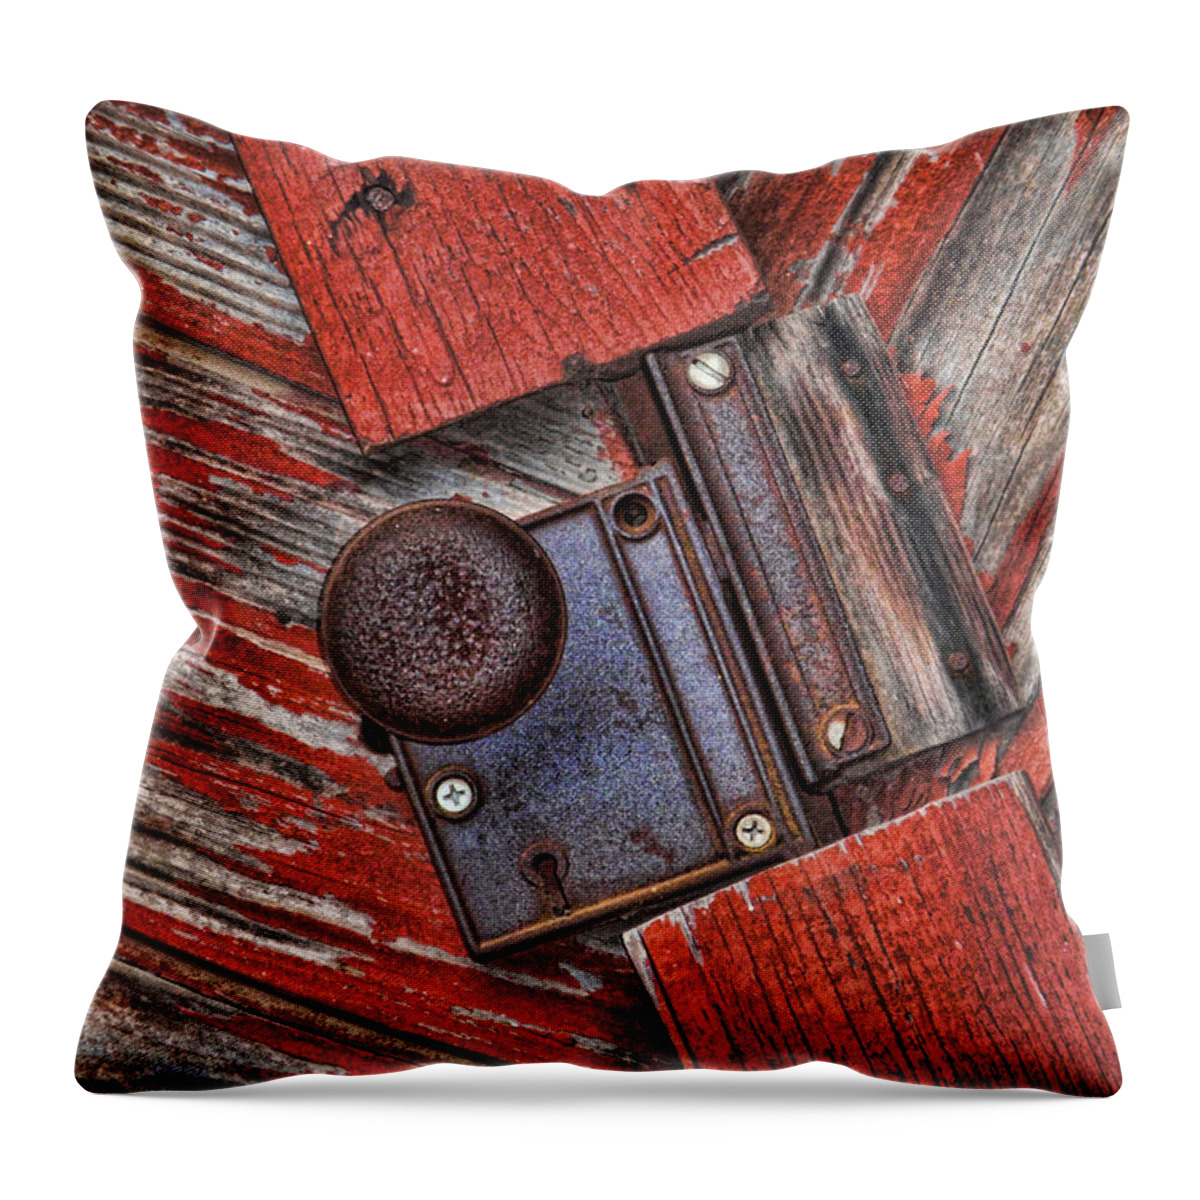 Rusty Throw Pillow featuring the photograph Rusty Dusty and Musty by Kathy Clark